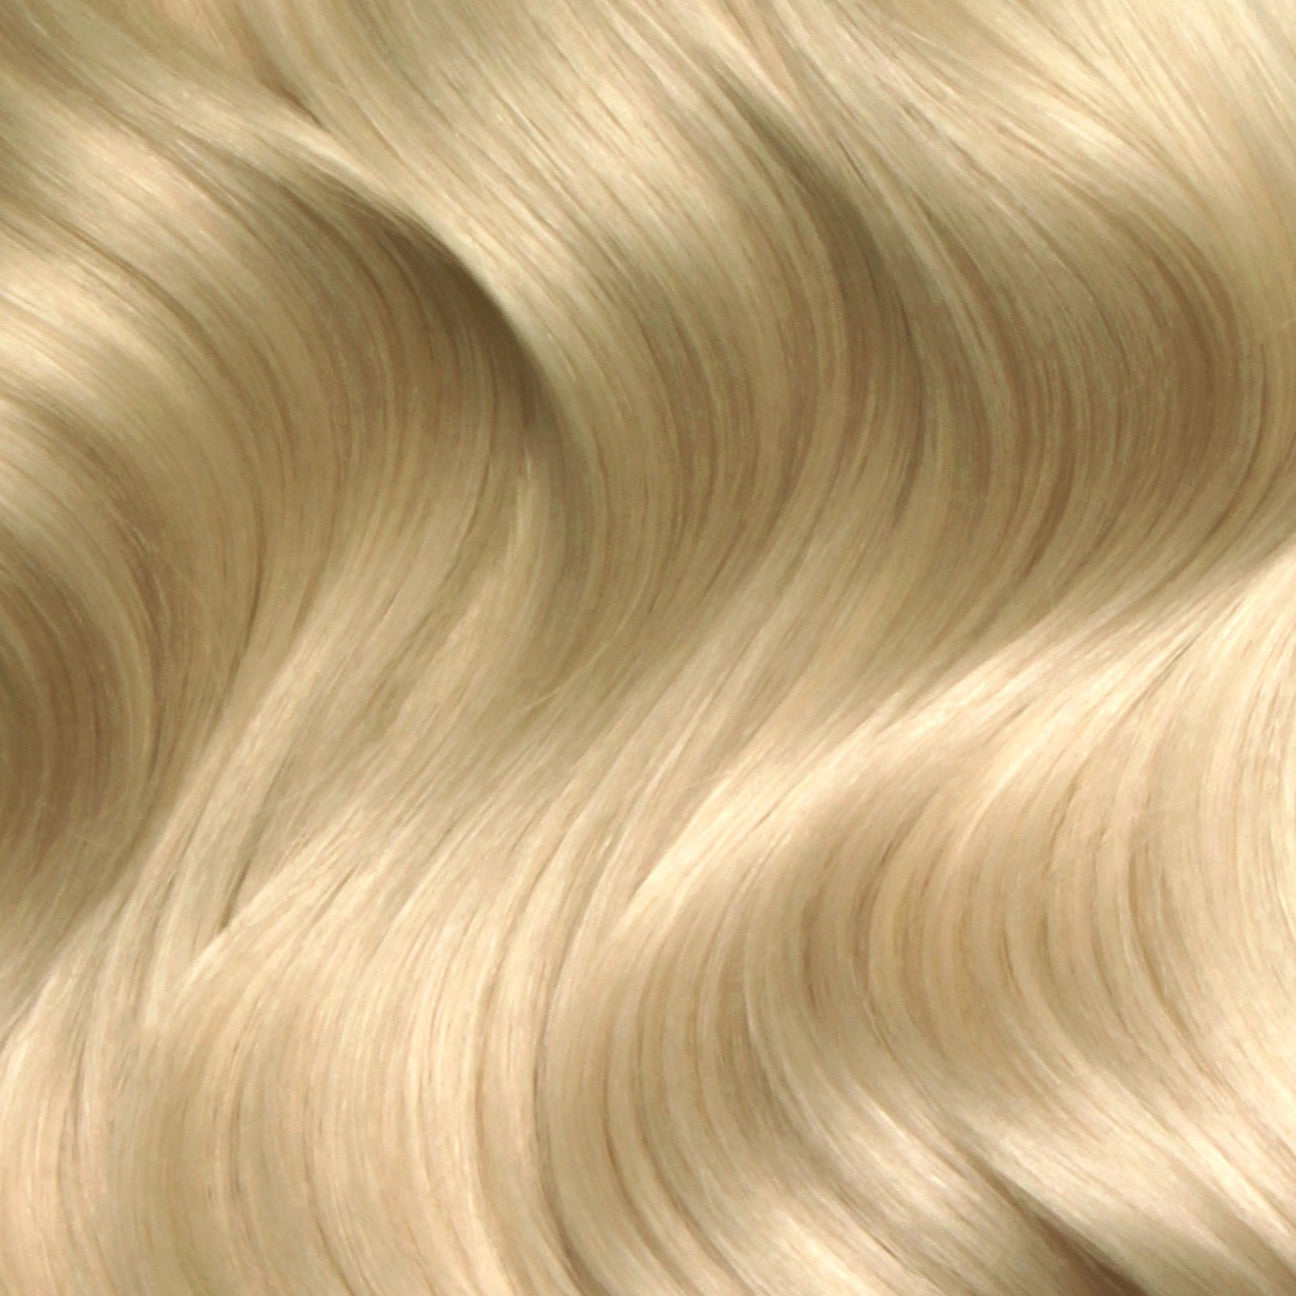 Nano Bonds 18 Inches - SWAY Hair Extensions LA-Blonde-613-24 Ultra-fine, invisible bonds for a flawless, natural look. 100% Remy Human hair, lightweight and versatile. Reusable and perfect for individual or salon use.